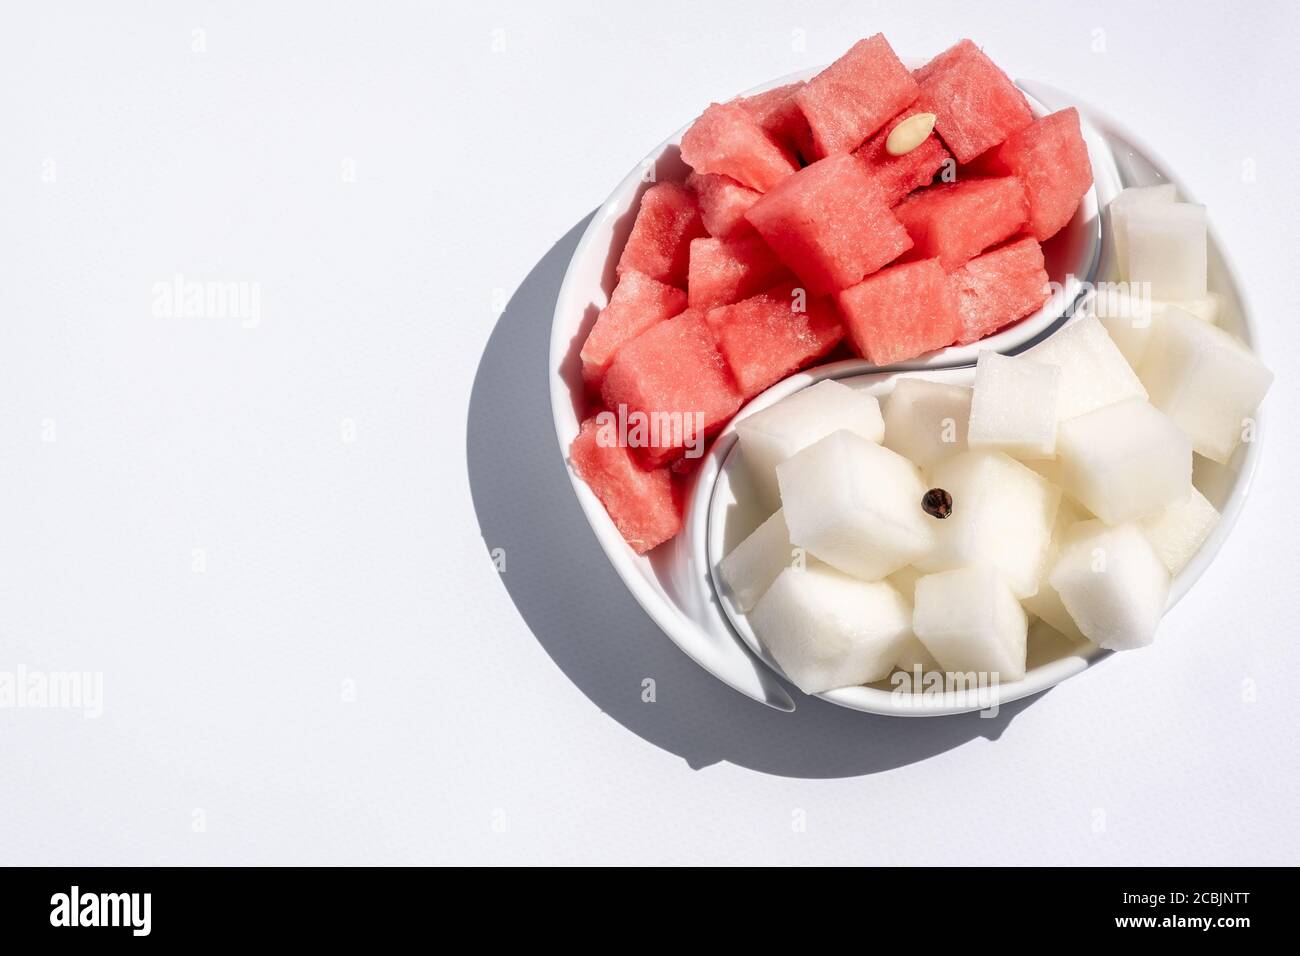 Ripe watermelon and melon, cut into cubes, laid out on a yin-yang dish. Juicy, ripe summer fruits. Bright light. Space for text. Stock Photo